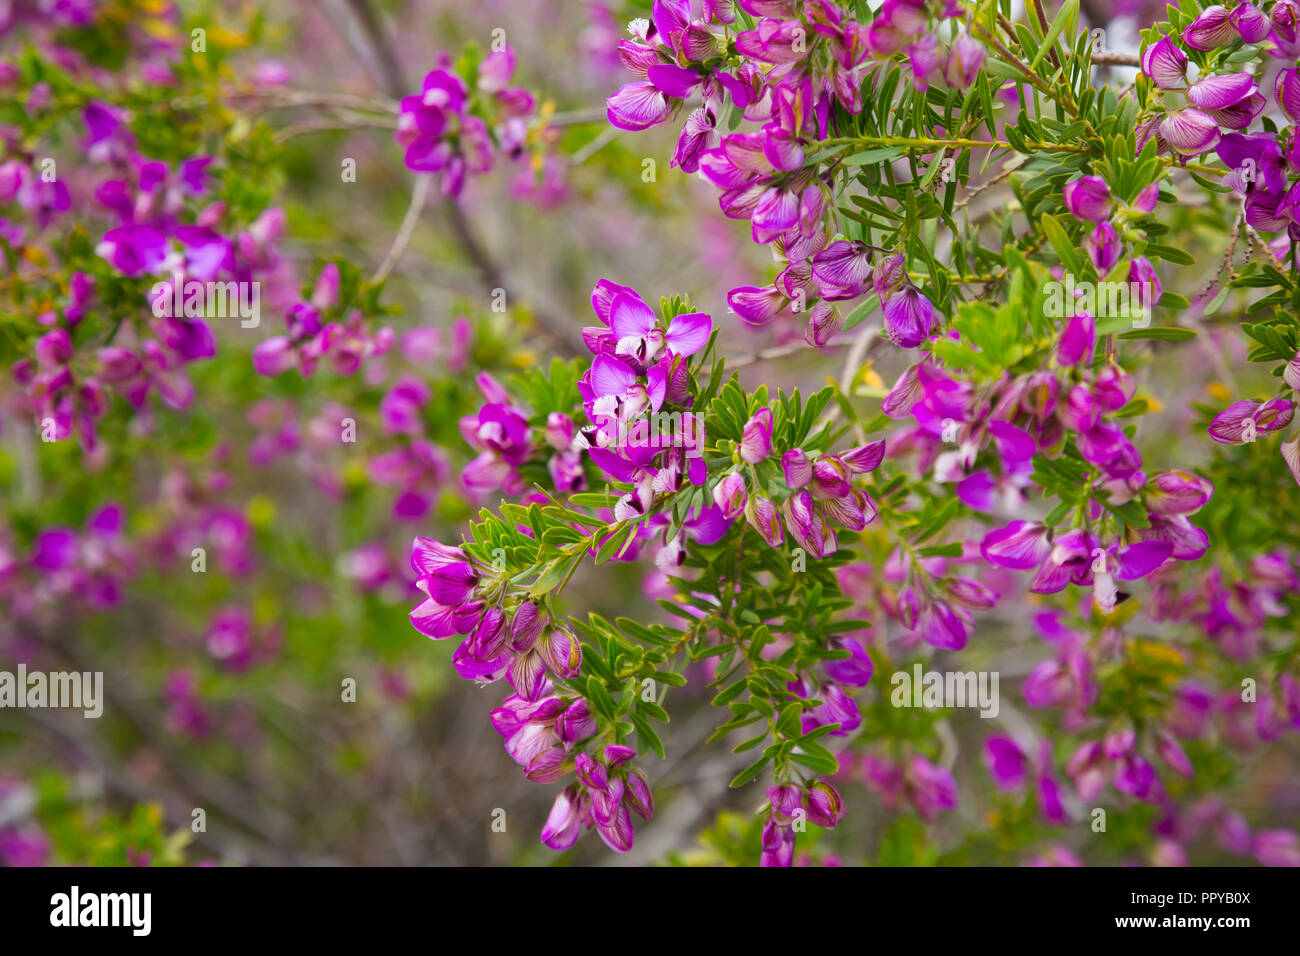 dense amount of little bright pnk flowers polygala myrtifolia in the park Stock Photo